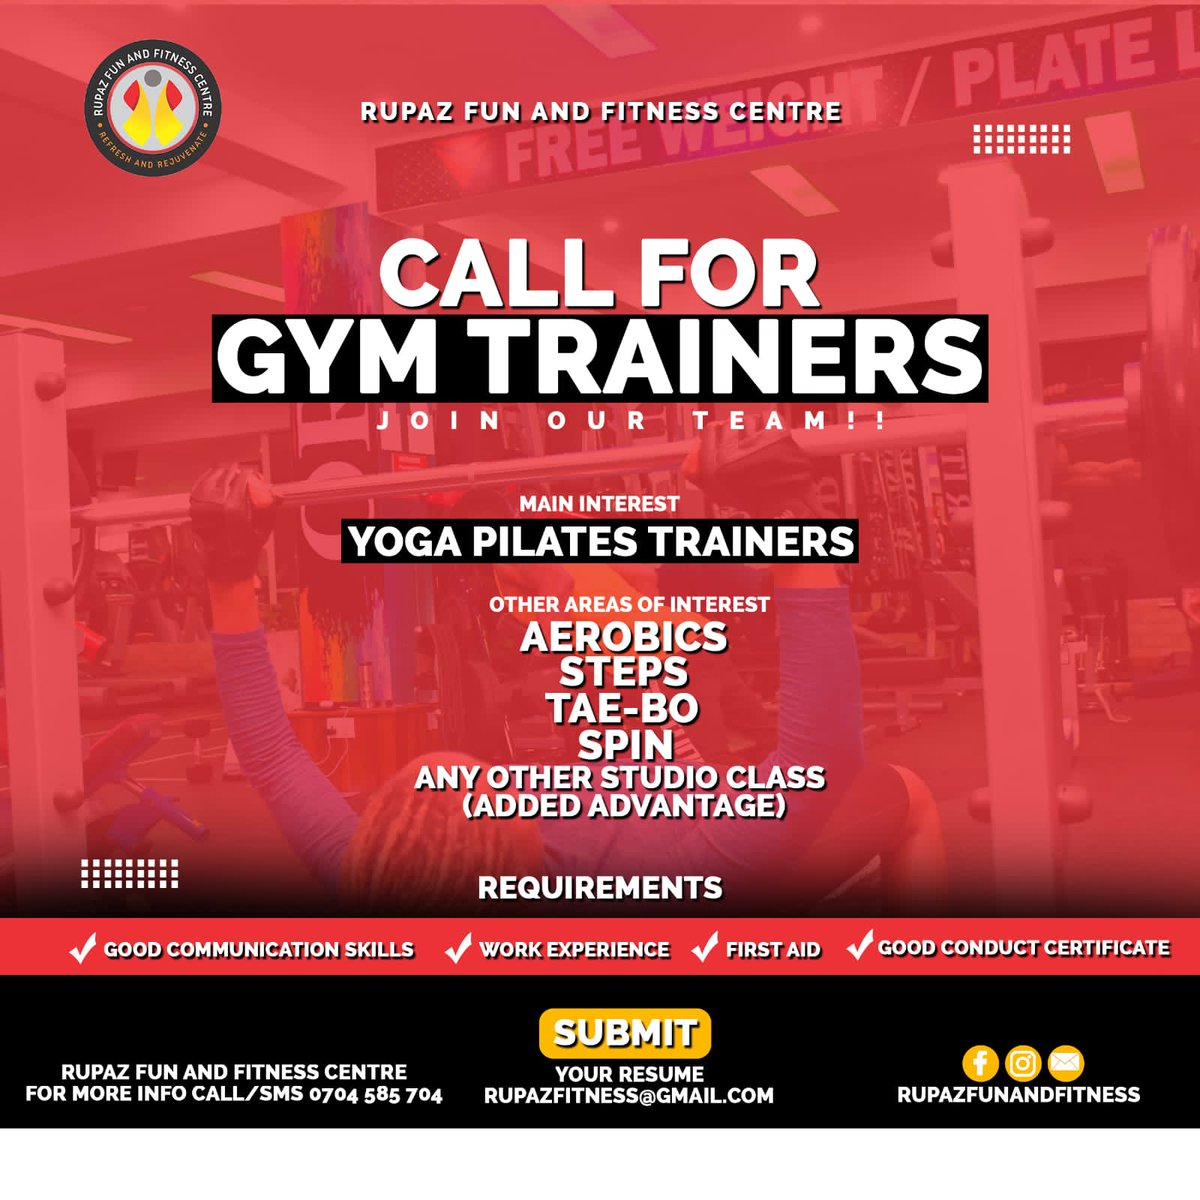 An opportunity to work in one of the best fitness facilities in the country... we are hiring

See poster for details 

#ikokazike #jobs #fitnessjobs #jobads #Eldoret #Kenya